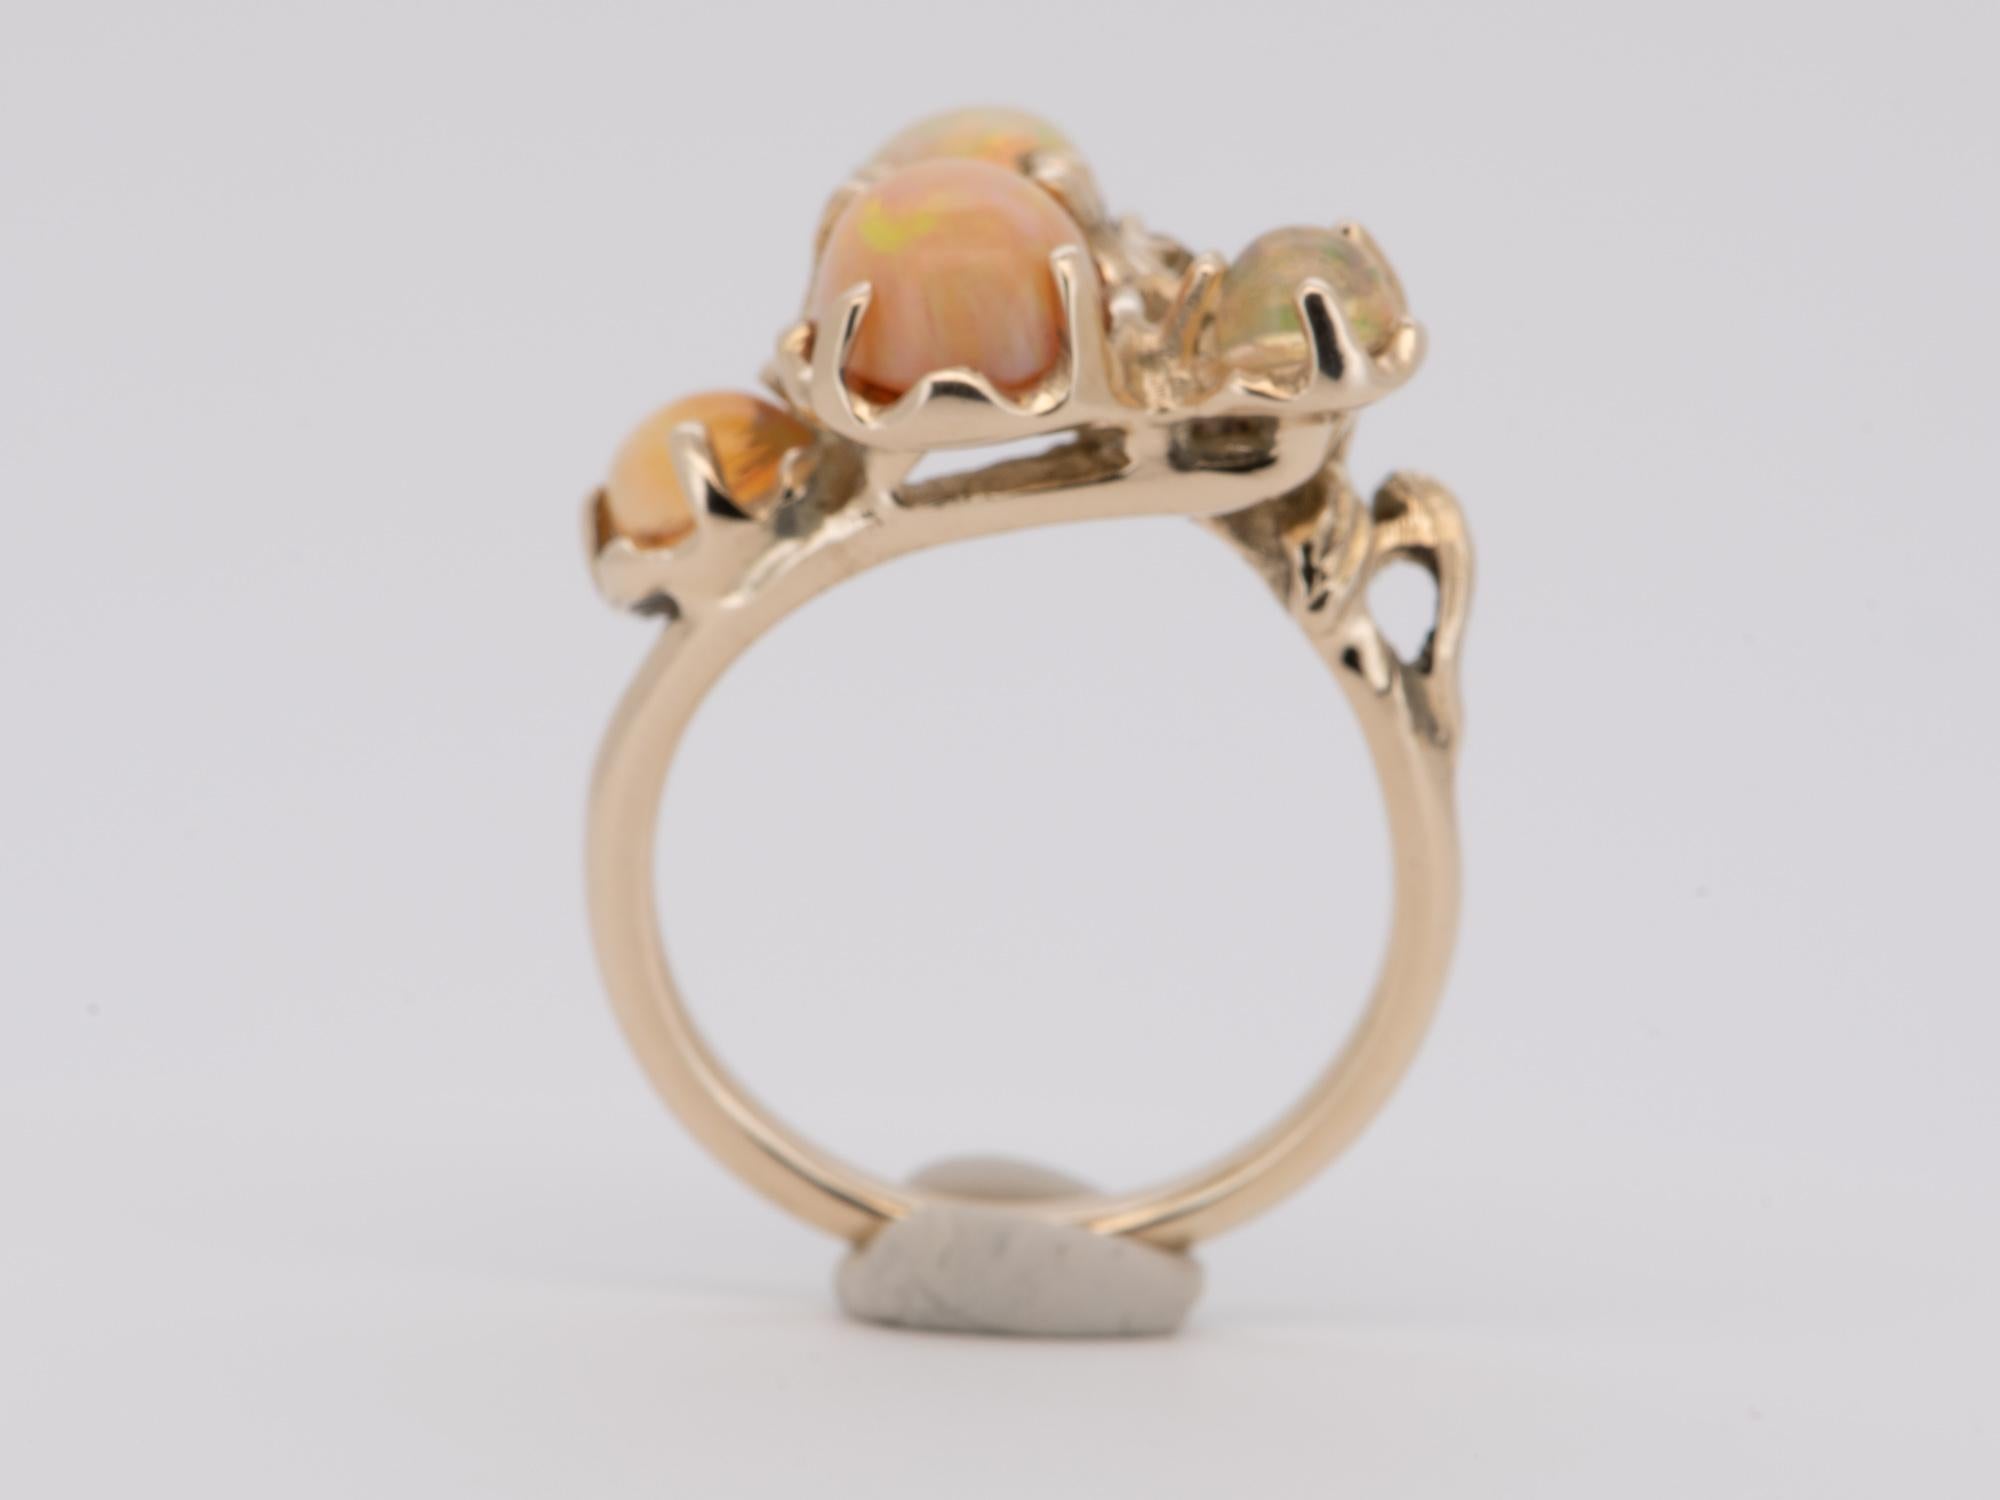 Mexican Fire Opal Organic Branch Ring 14K Gold R6728 In Good Condition For Sale In Osprey, FL